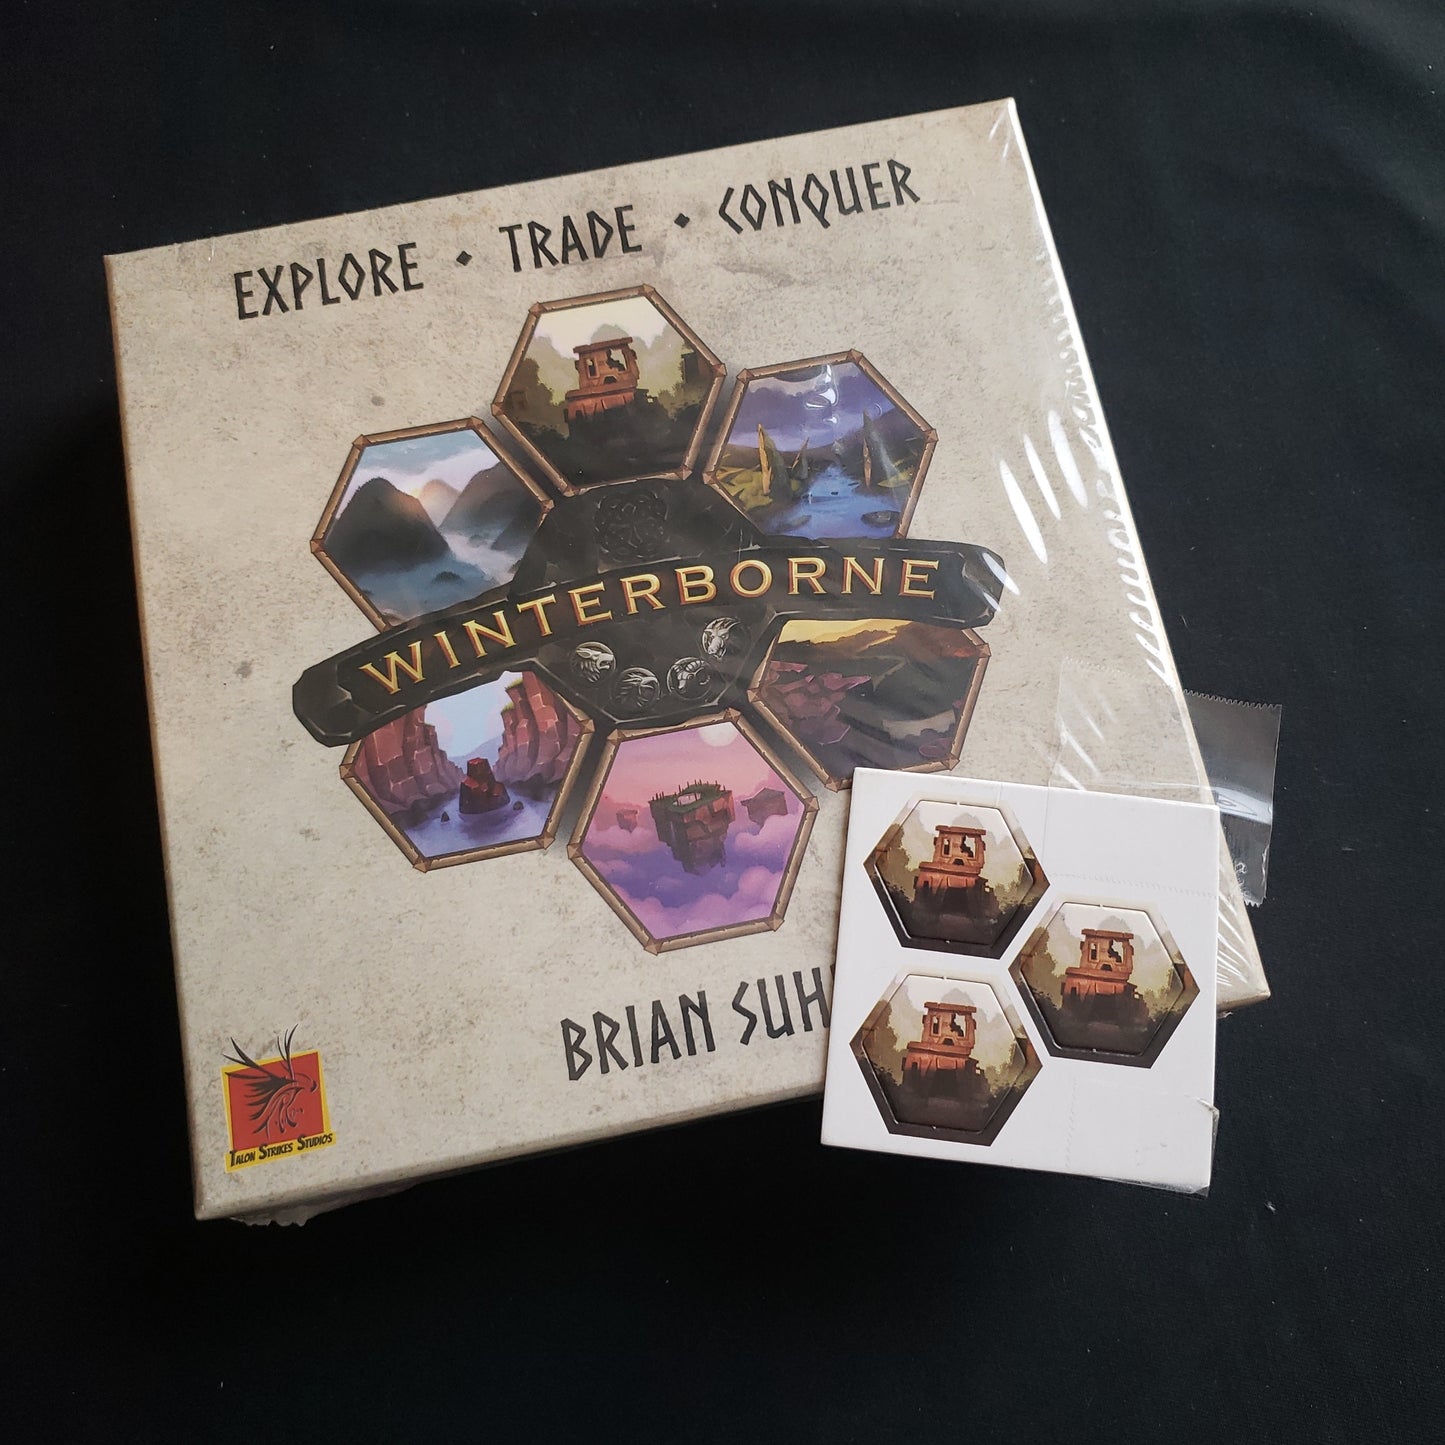 Image shows the front cover of the box of the Winterborne board game, with a card of bonus hex tiles sitting on top of it